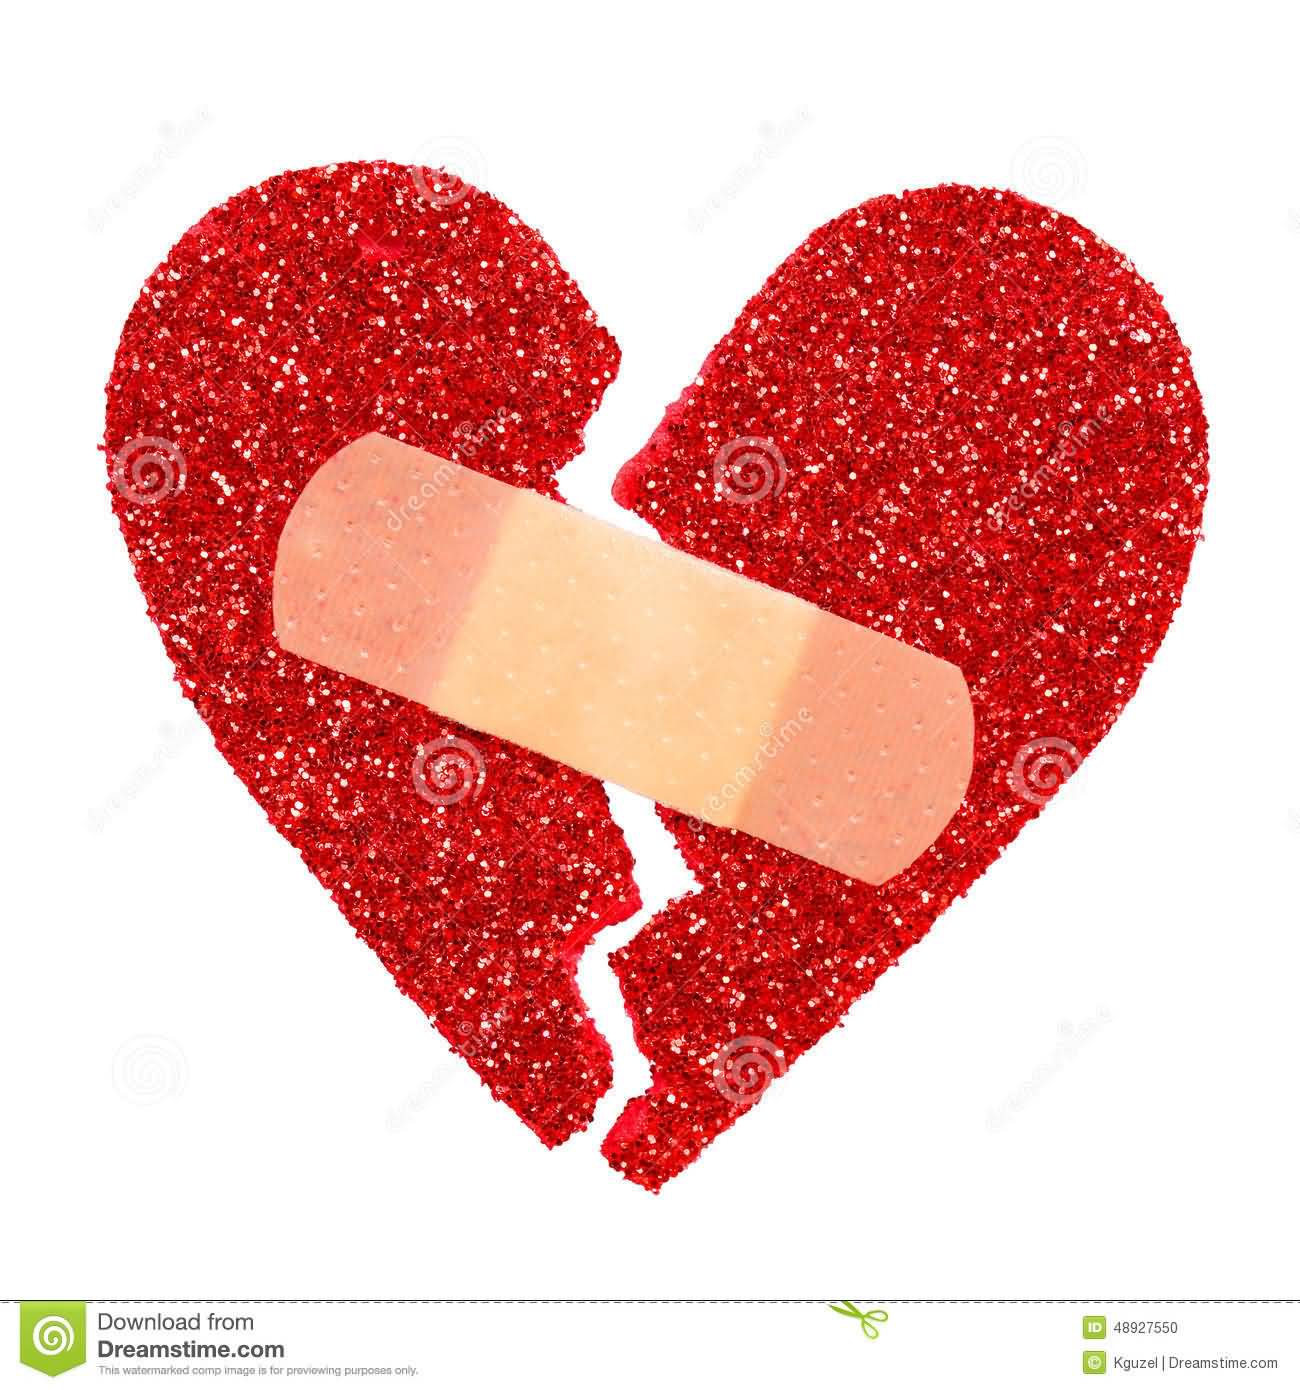 Glitter Ripped Heart Fixed With Adhesive Bandage